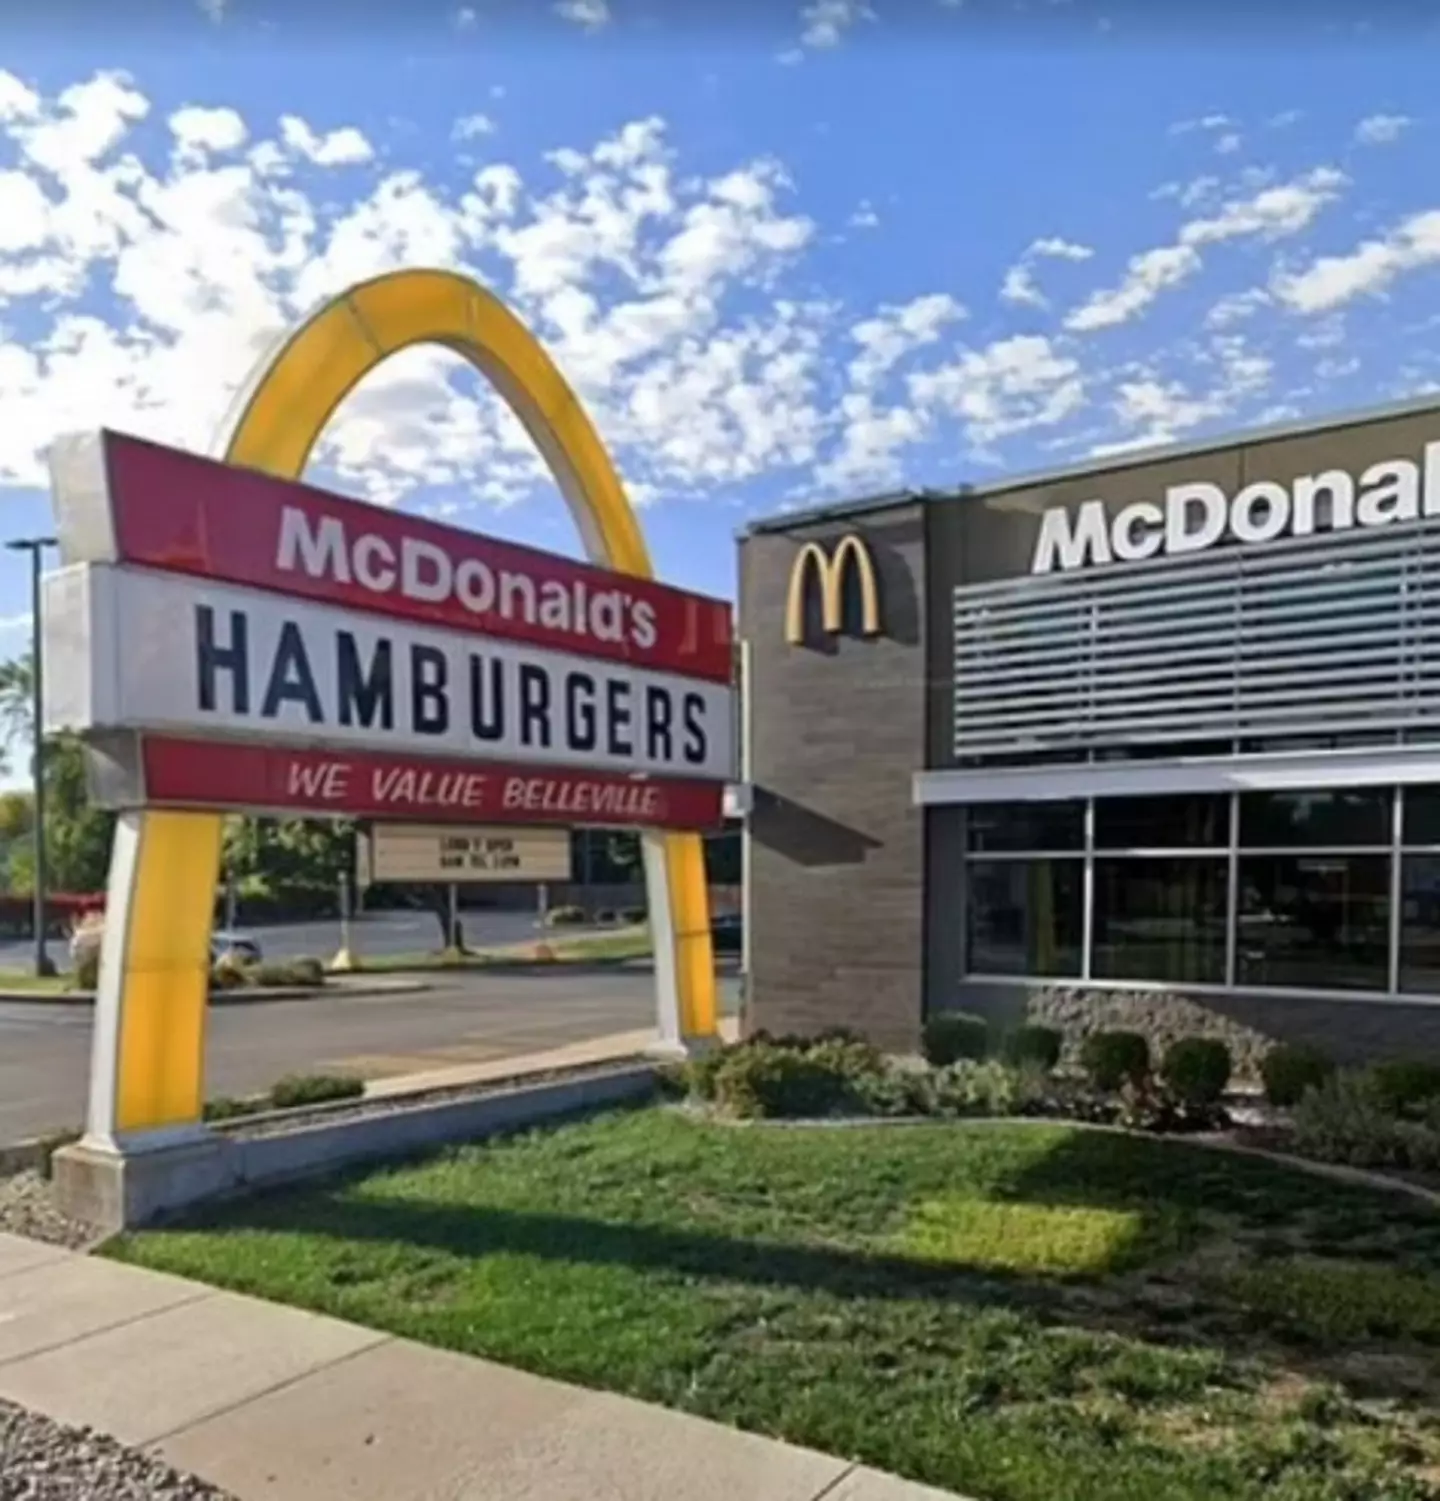 This single arched McDonald's opened all the way back in 1961.